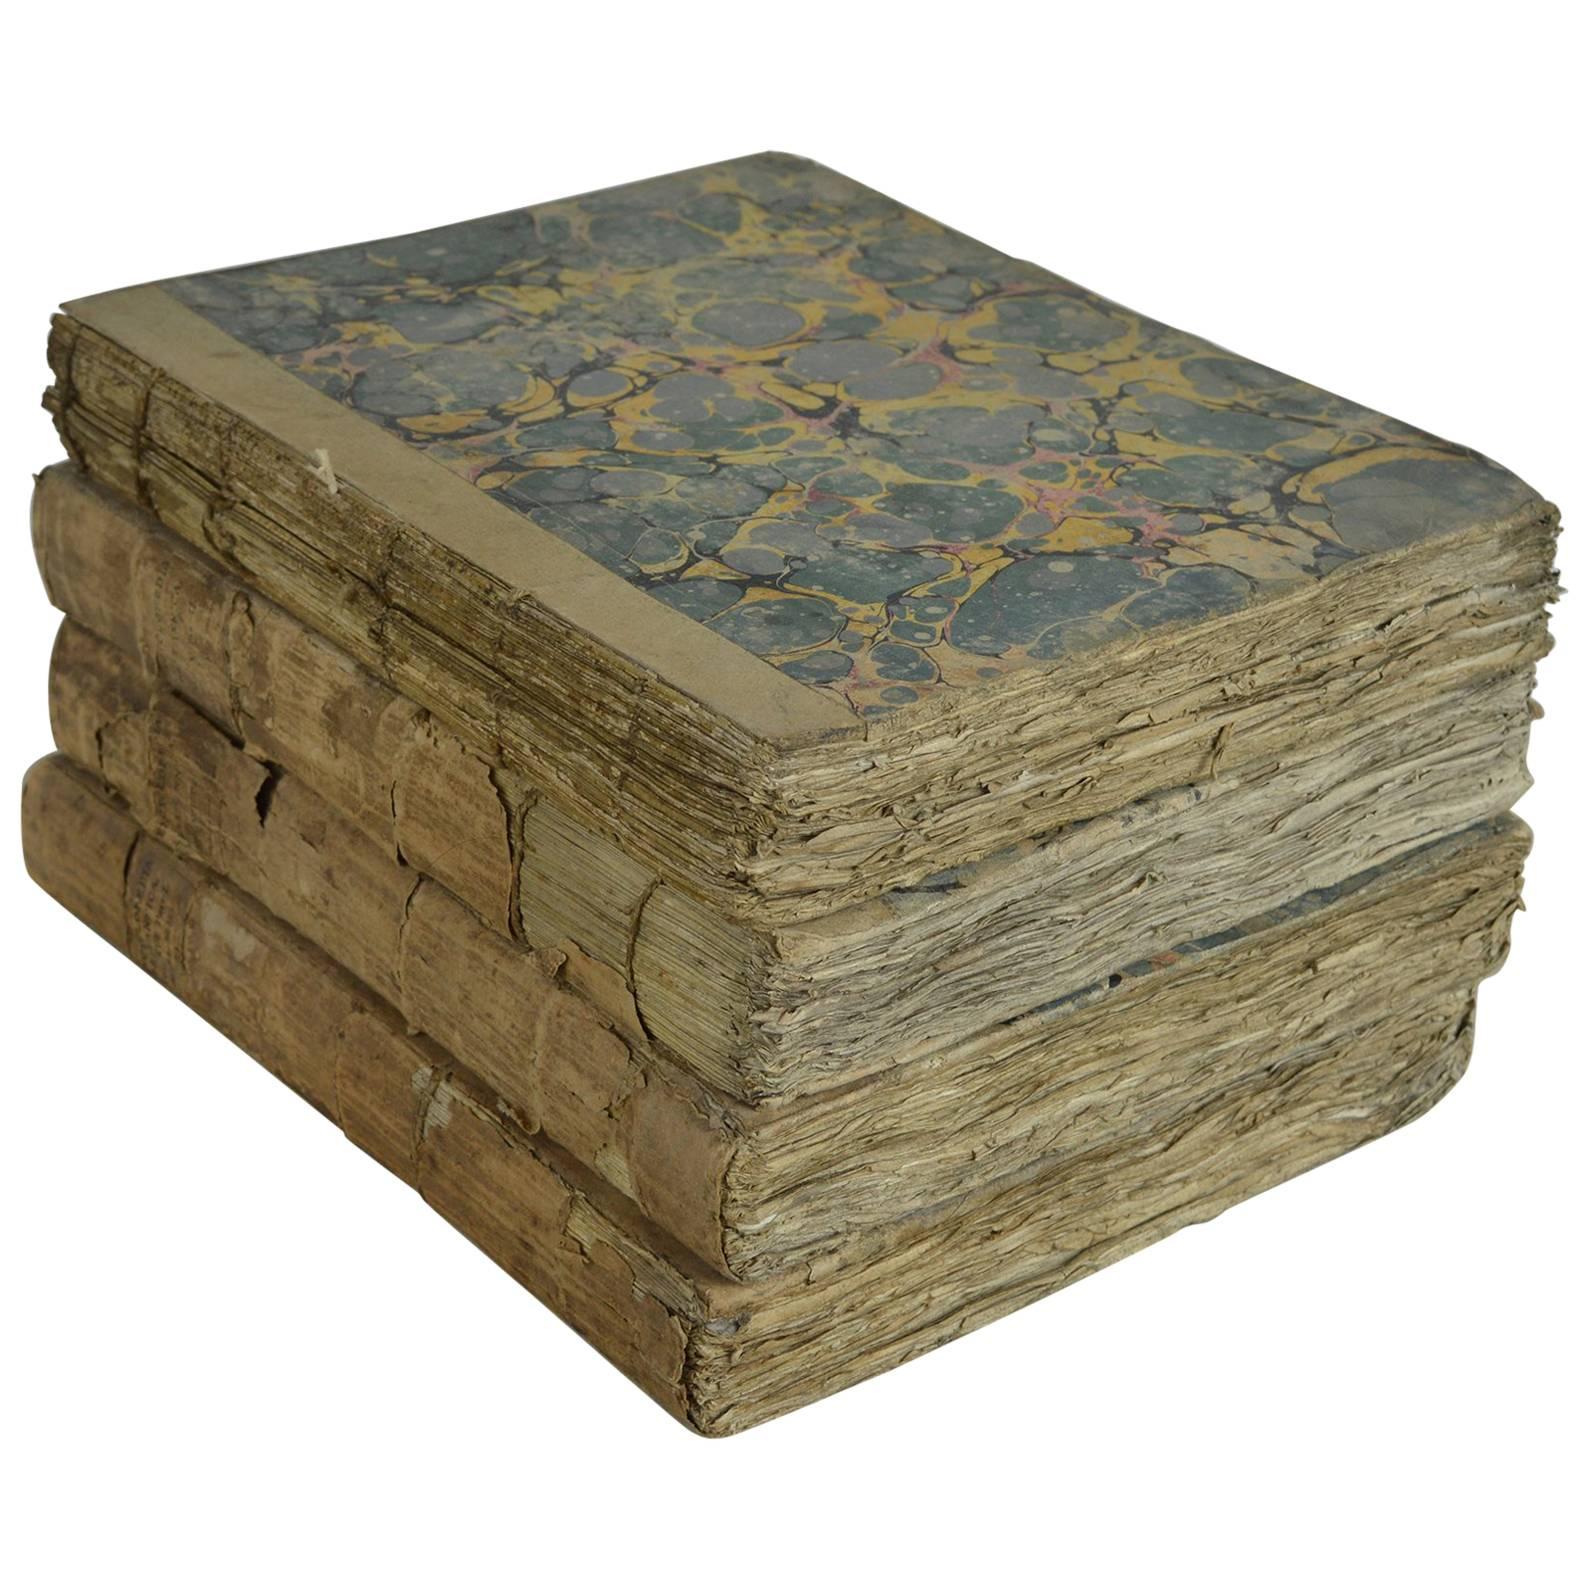 Sets of Antique 18th Century Books with Marbleized Bindings